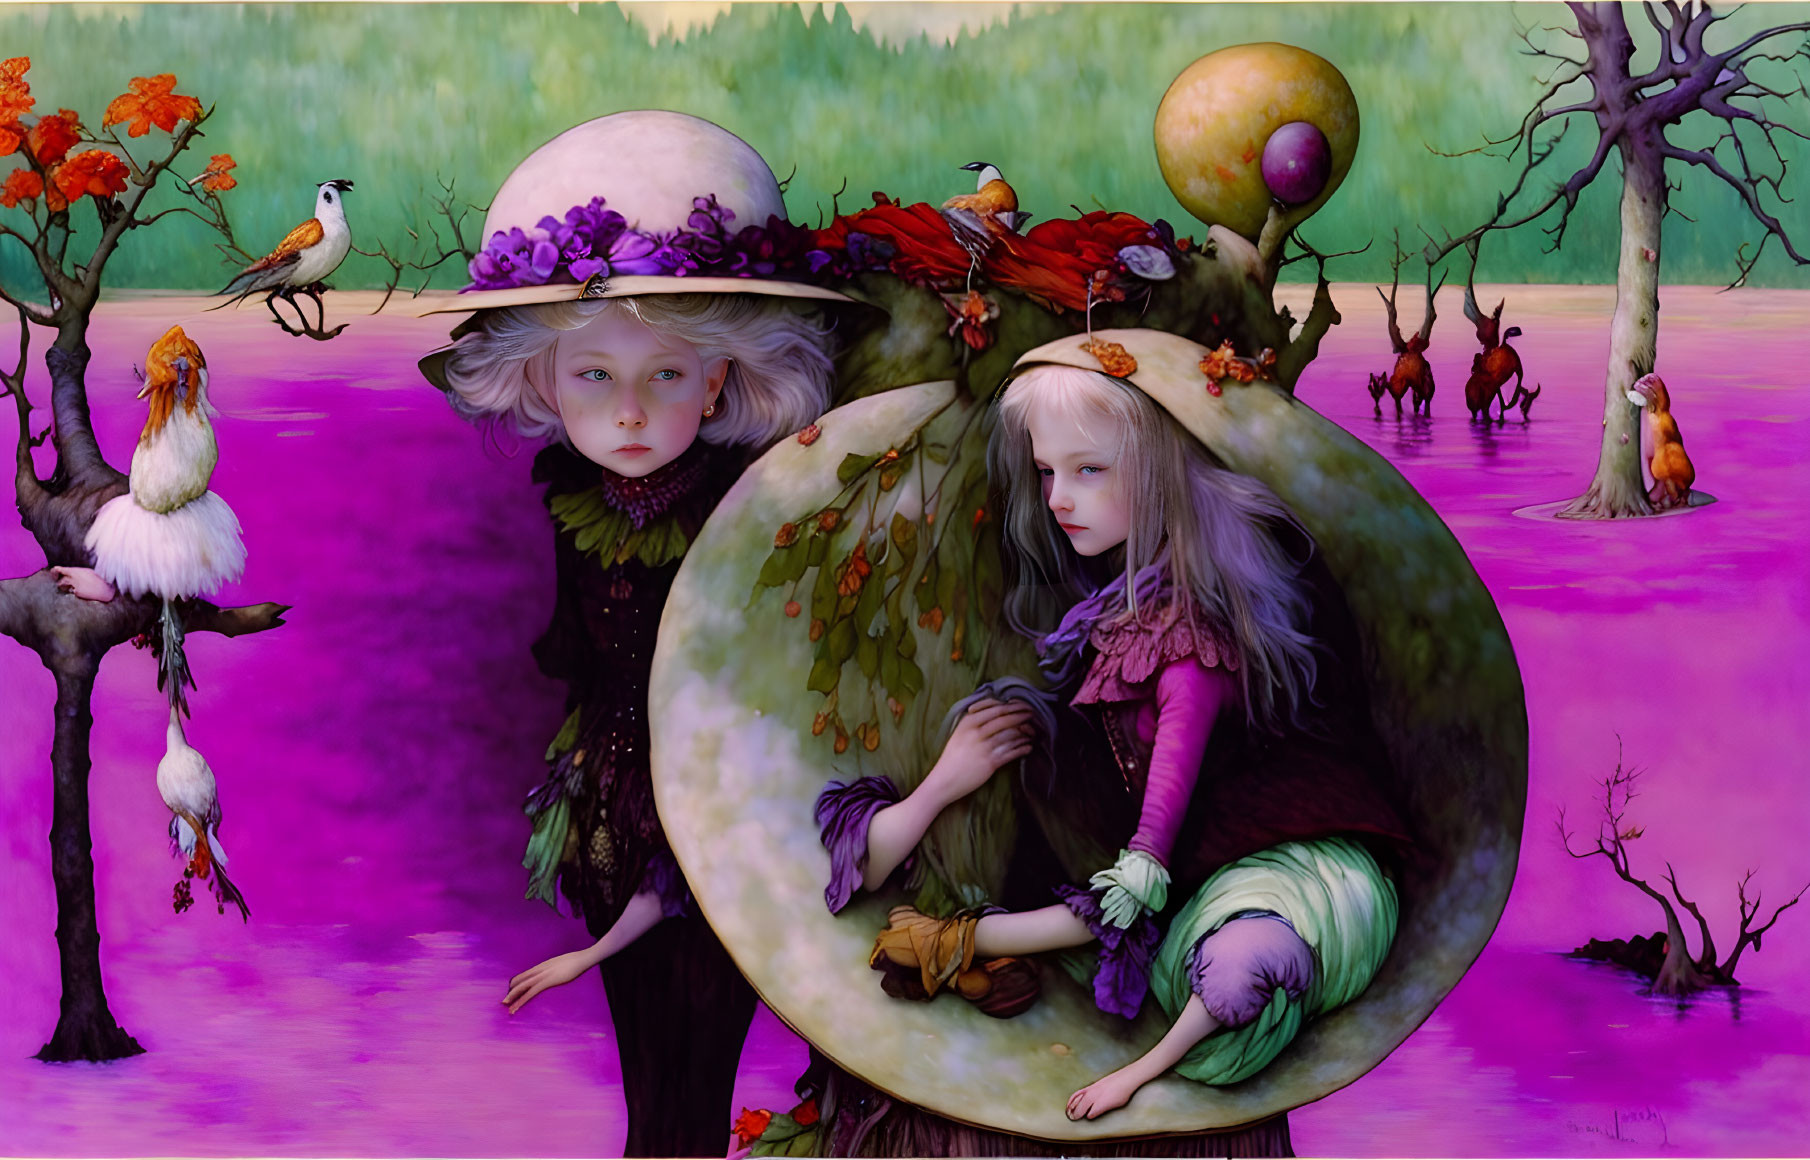 Whimsical girls in surreal, vibrant landscape with birds and apple-headed figures